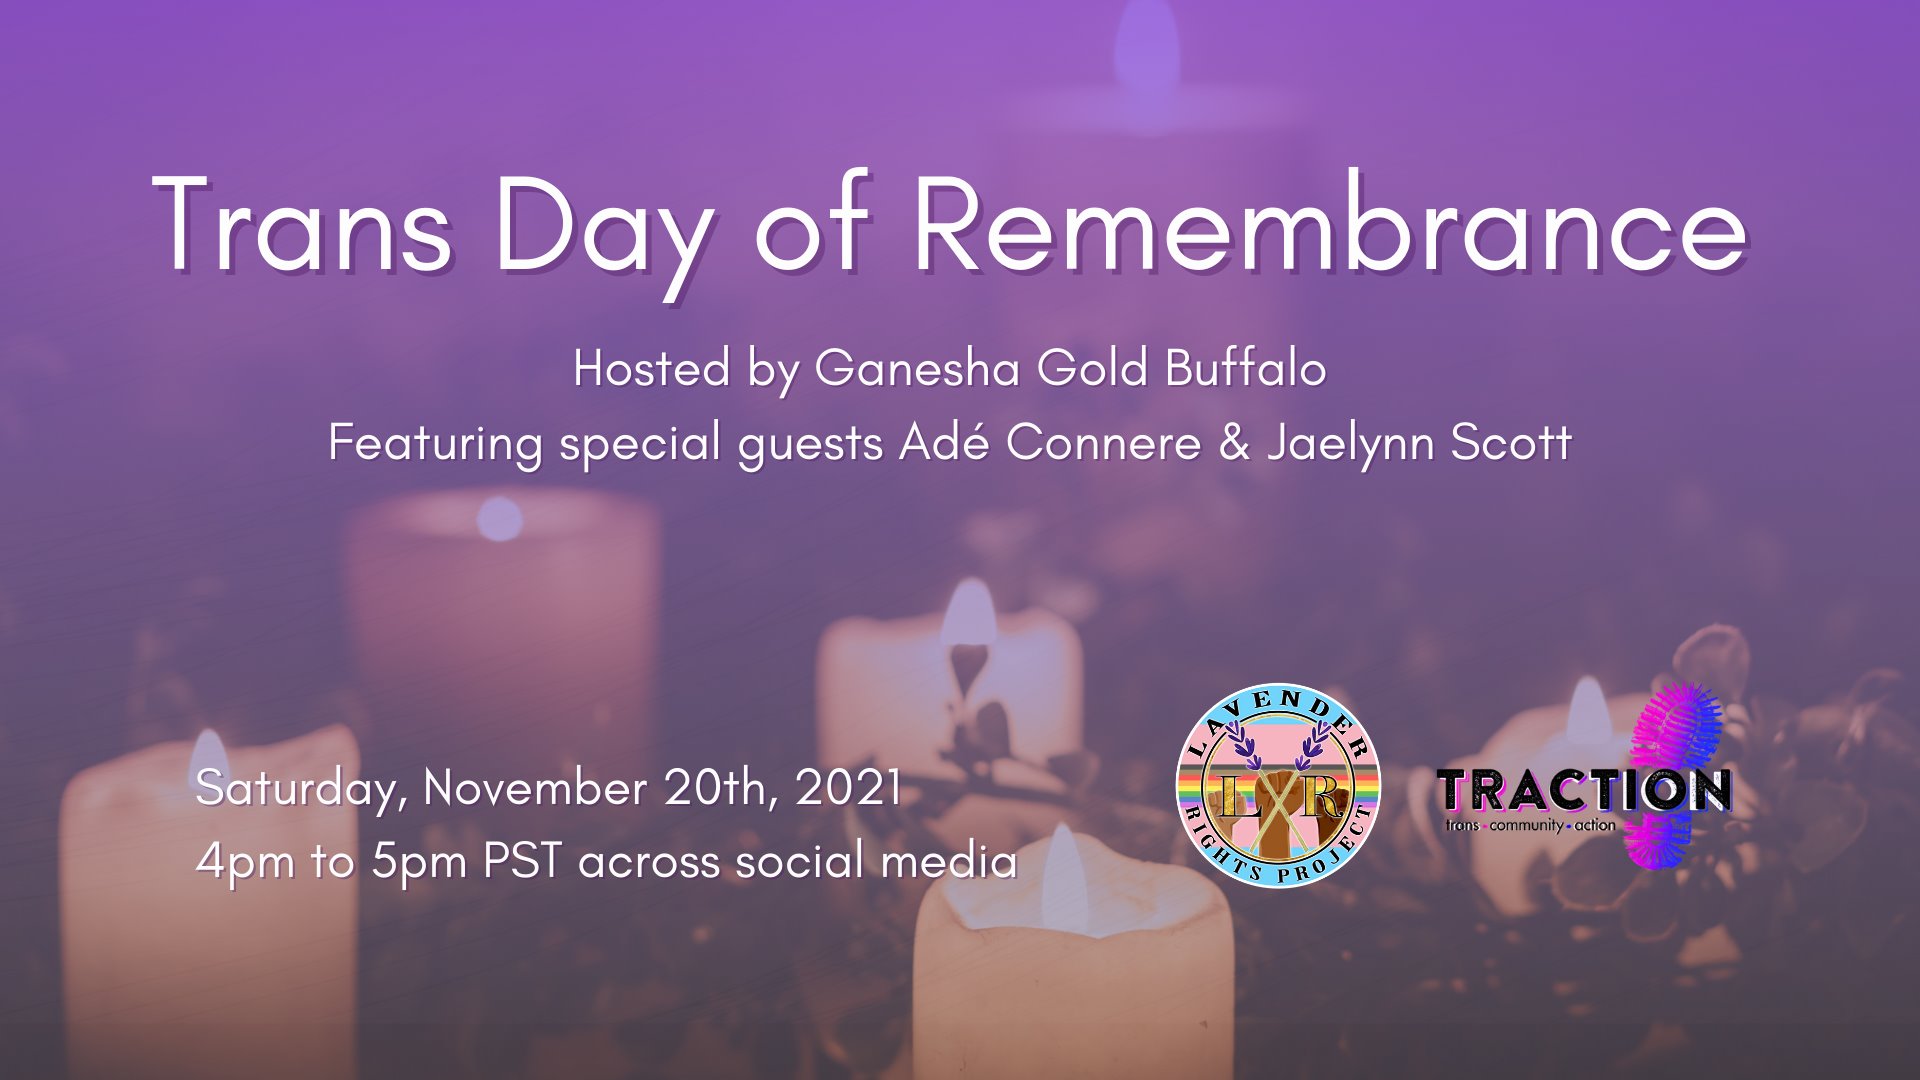 Trans Day of Remembrance 2021